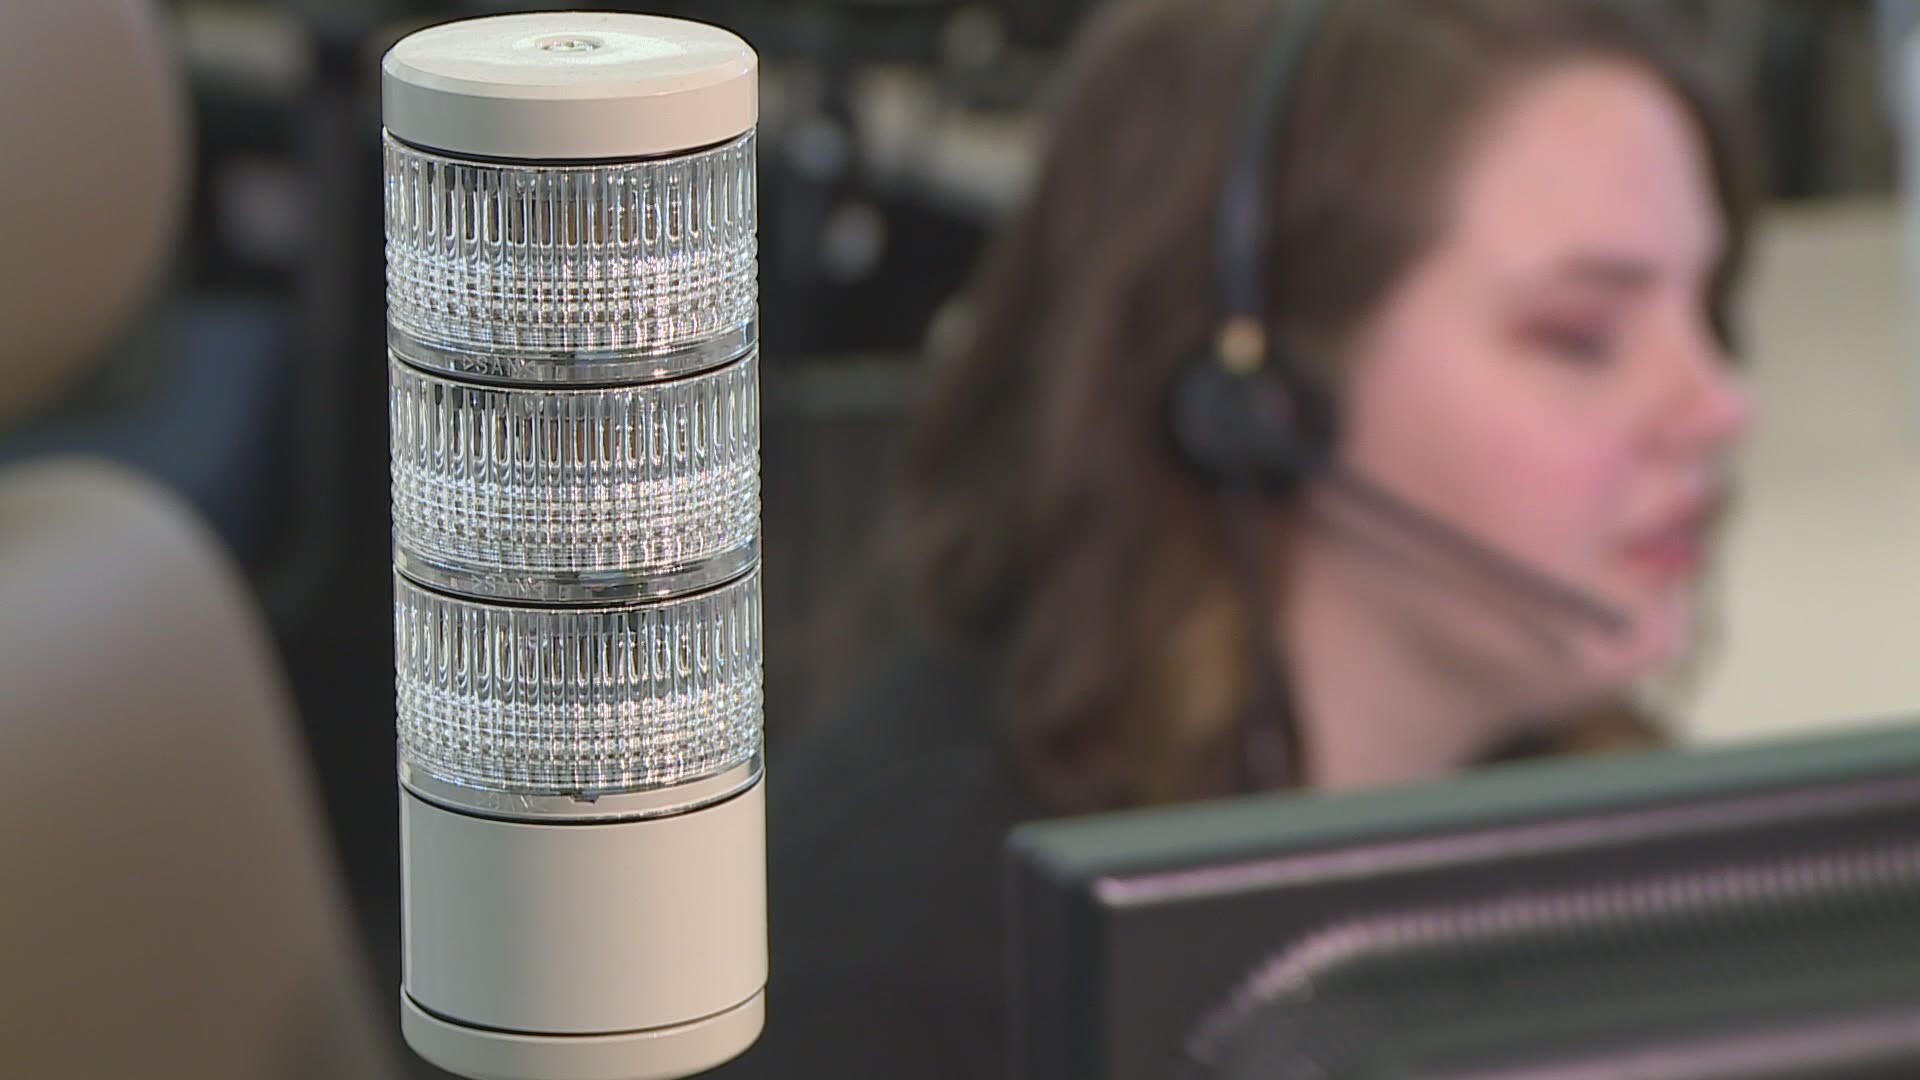 Protecting St. Louis County in dispatcher’s family